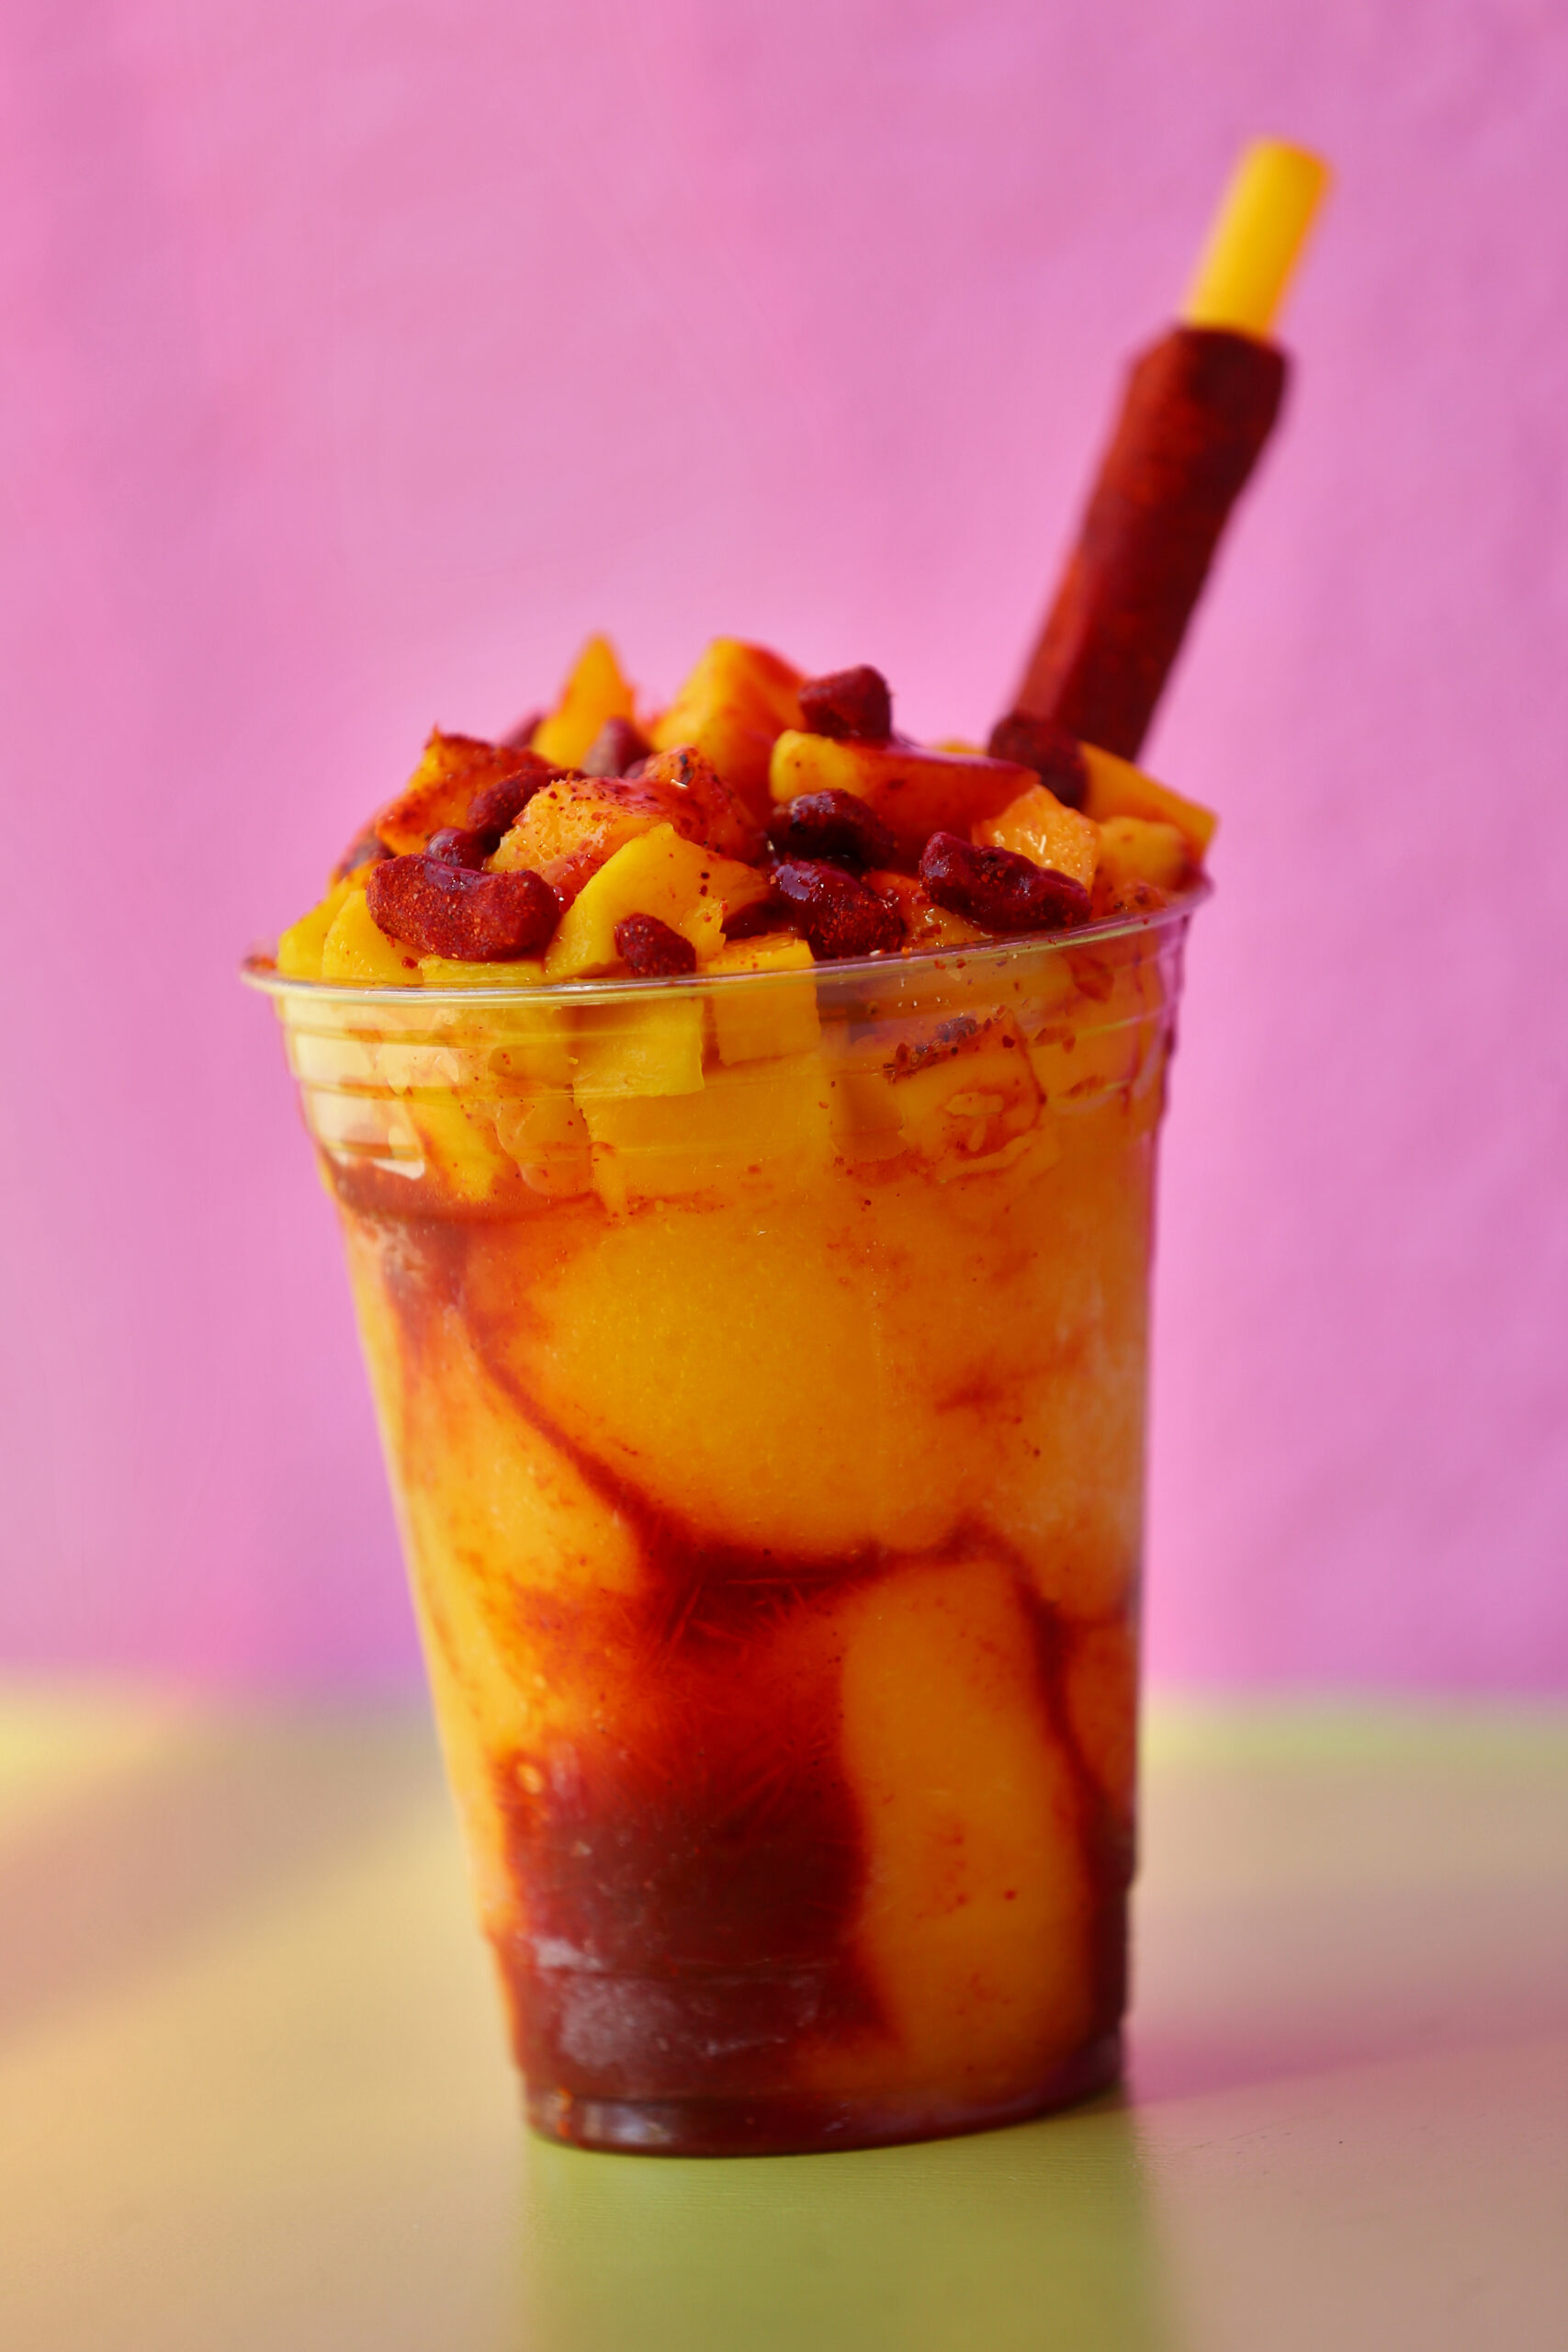 A Mangonada made by Teresita Fernandez at La Michoacana in Sonoma. The drink consists of blended fresh mango with ice, swirled chamoy sauce, topped with mango chunks and tamarind candy, and a tamarind stick. (Christopher Chung/ The Press Democrat)